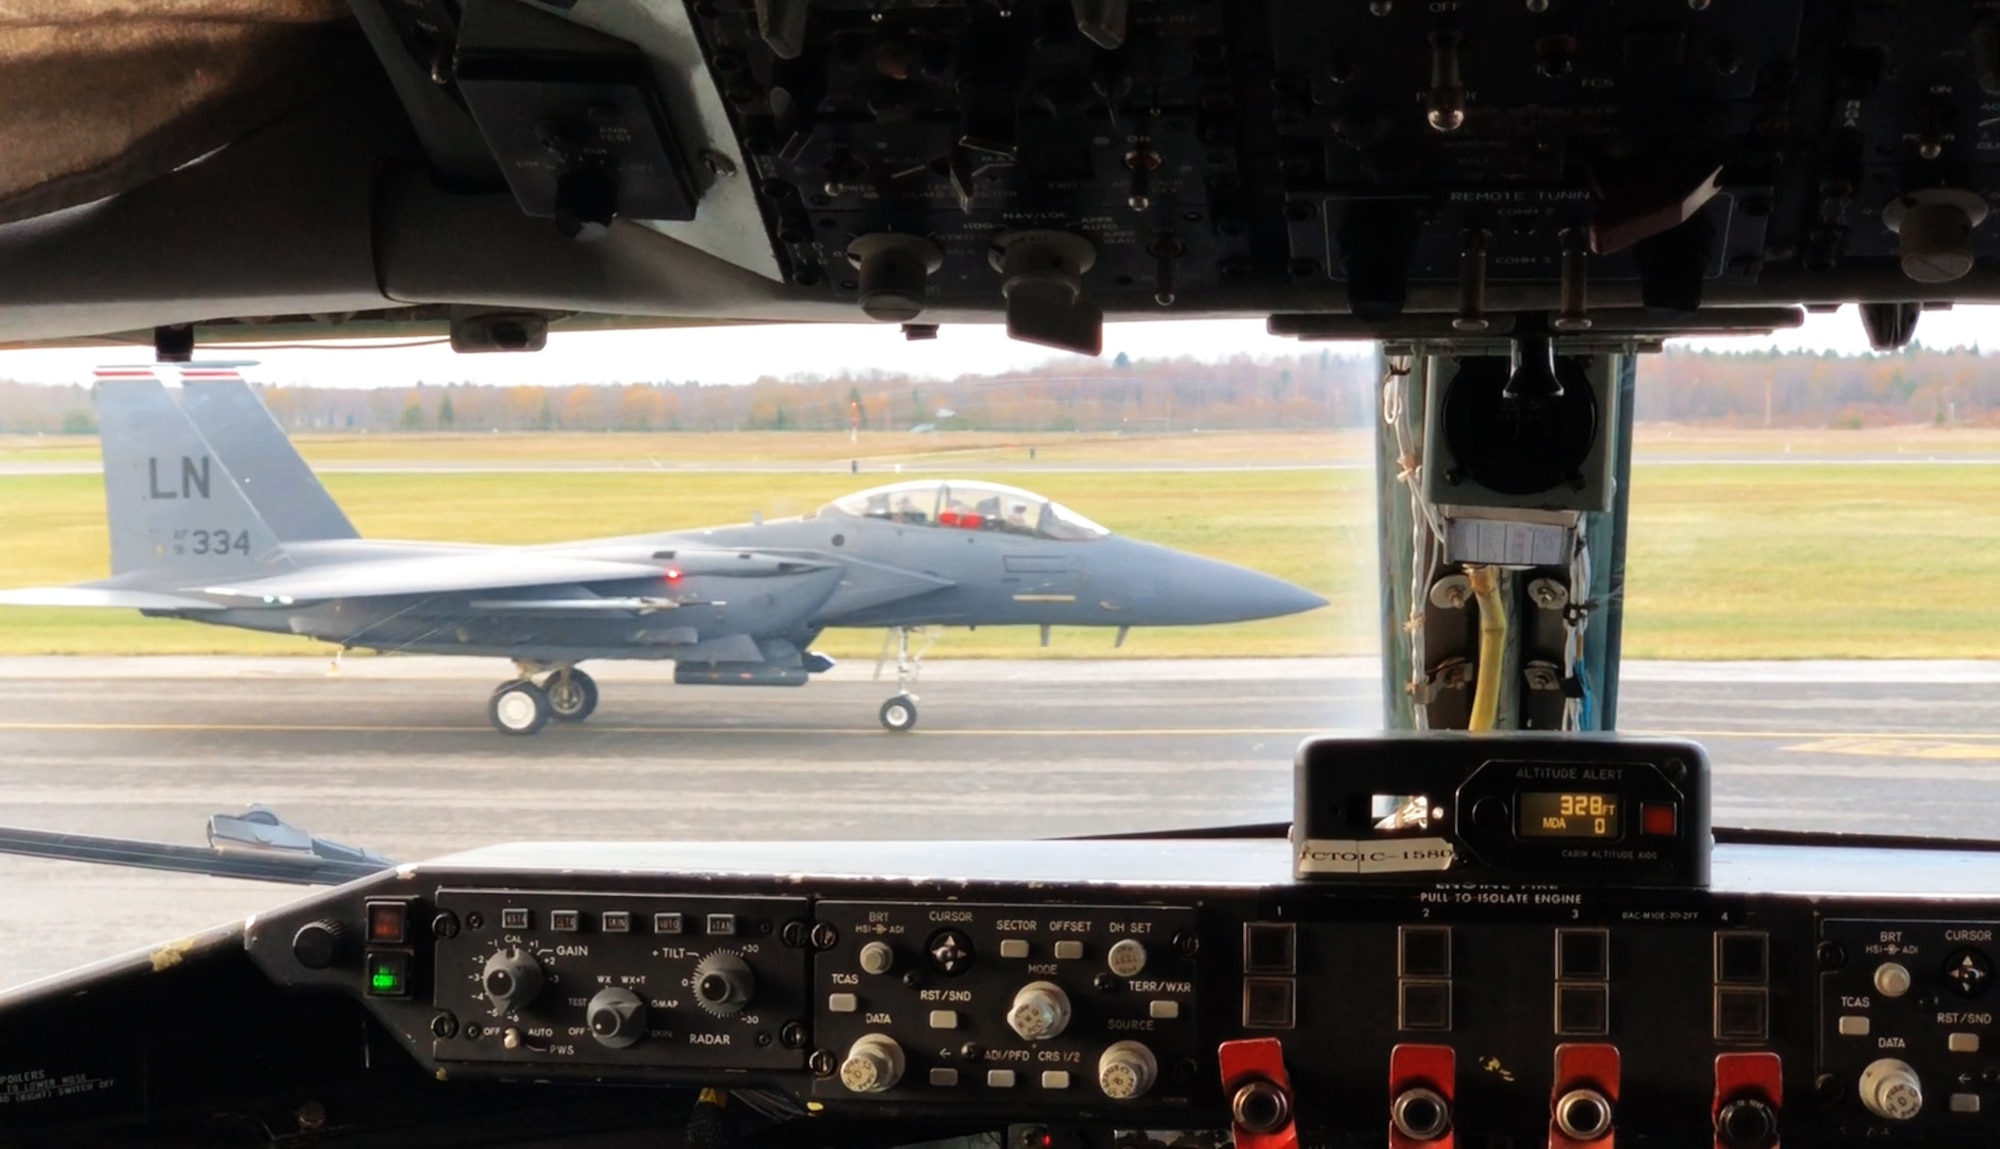 A U.S. Air Force F-15E Strike Eagle with the 48th Fighter Wing from RAF Lakenheath, England, lands in front of a parked U.S. Air Force KC-135 Stratotanker with the 100th Air Refueling Wing from RAF Mildenhall, England, during a deployment to Ӓmari Air Base, Estonia, Nov. 1, 2018. The Strike Eagles tested the airfield’s BAK-14 cable arresting system, which is used to safely bring fighter aircraft to a stop in the event of an emergency. (U.S. Air Force photo by Senior Airman Kelly O’Connor)